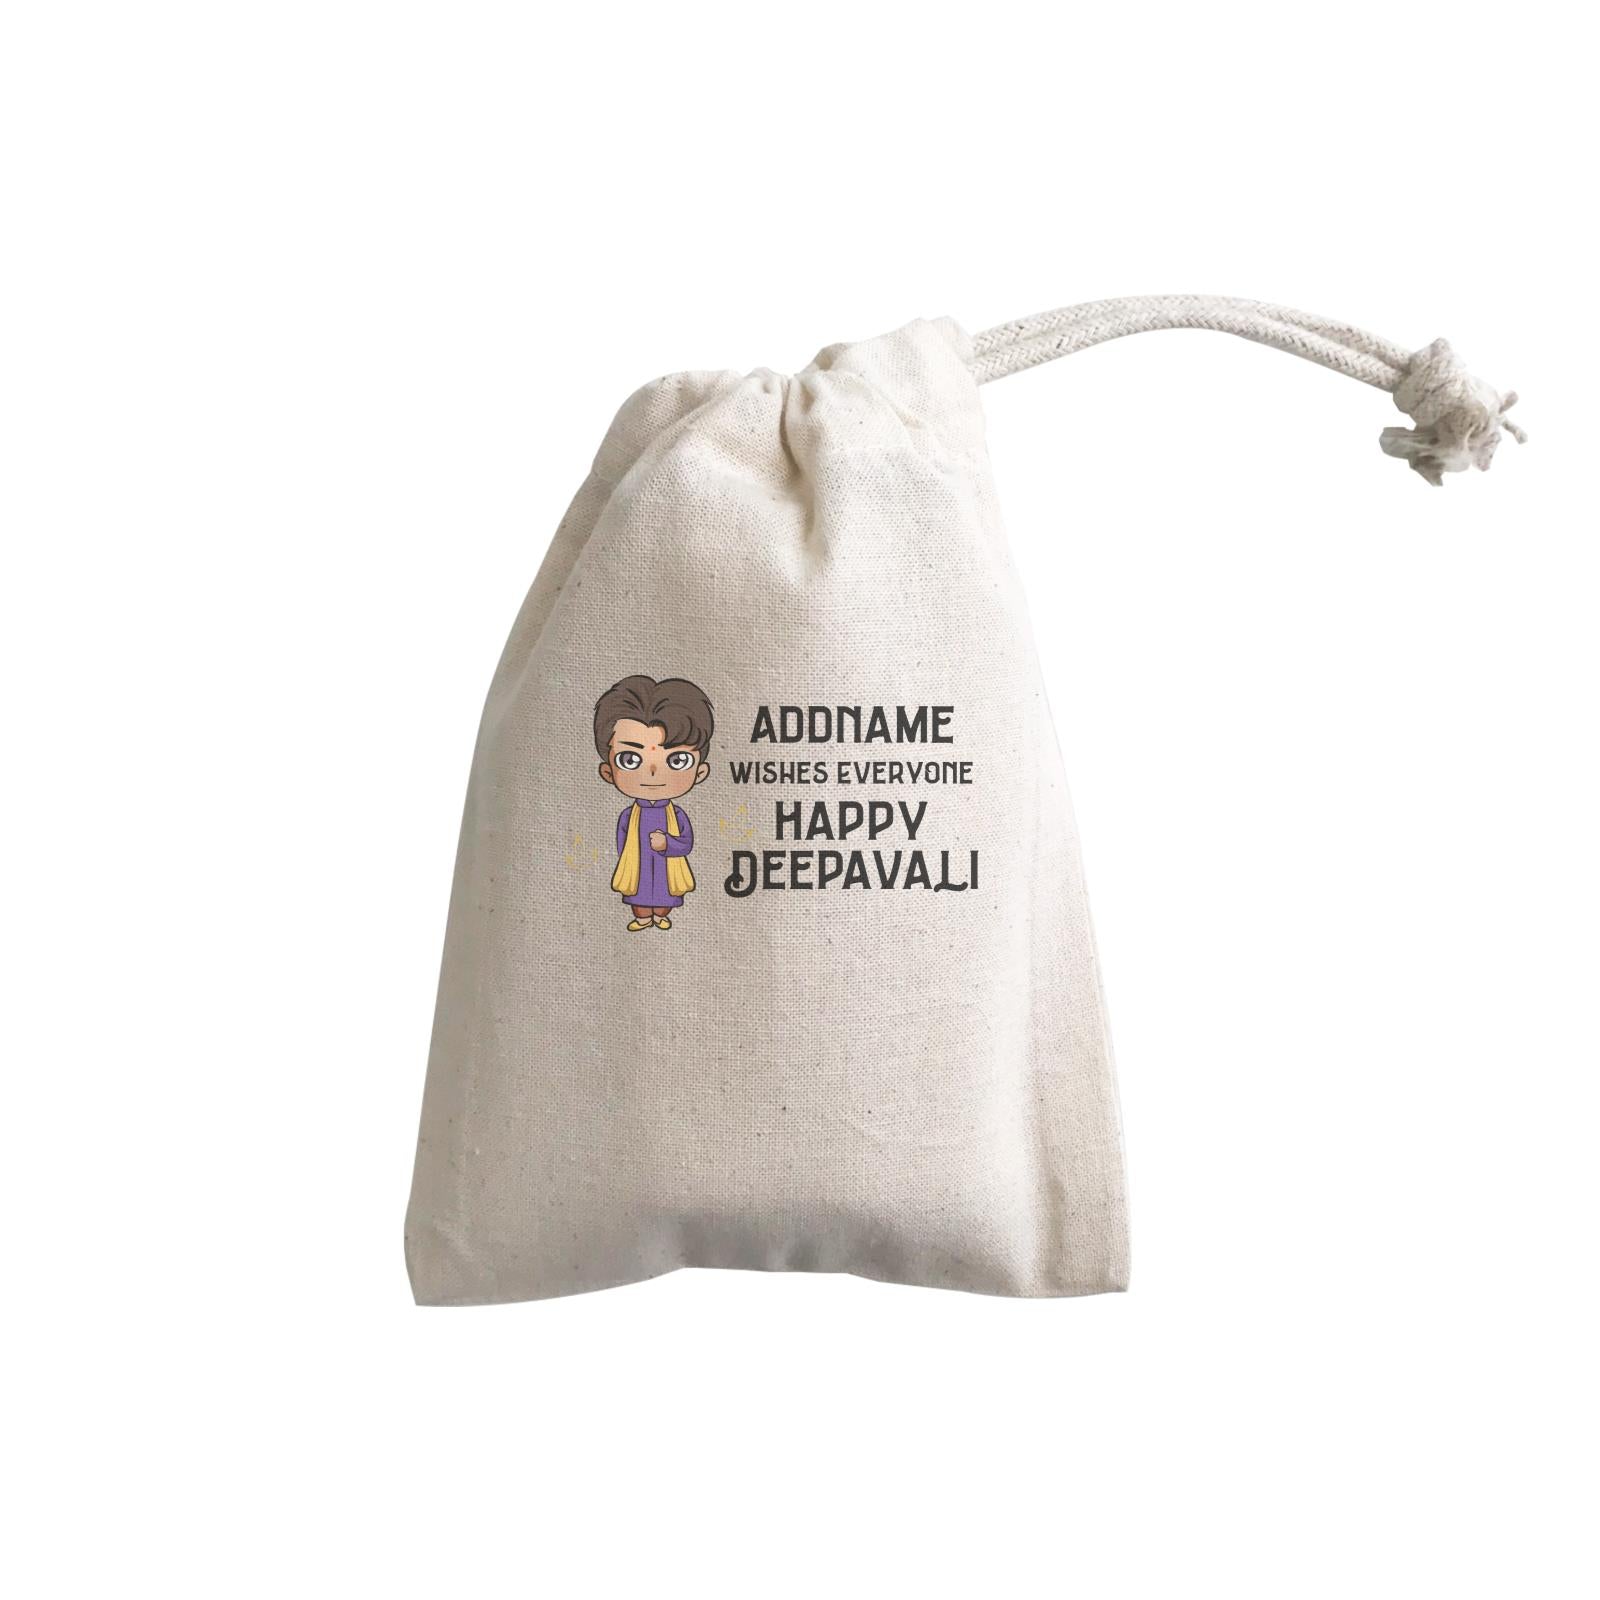 Deepavali Chibi Man Front Addname Wishes Everyone Deepavali GP Gift Pouch